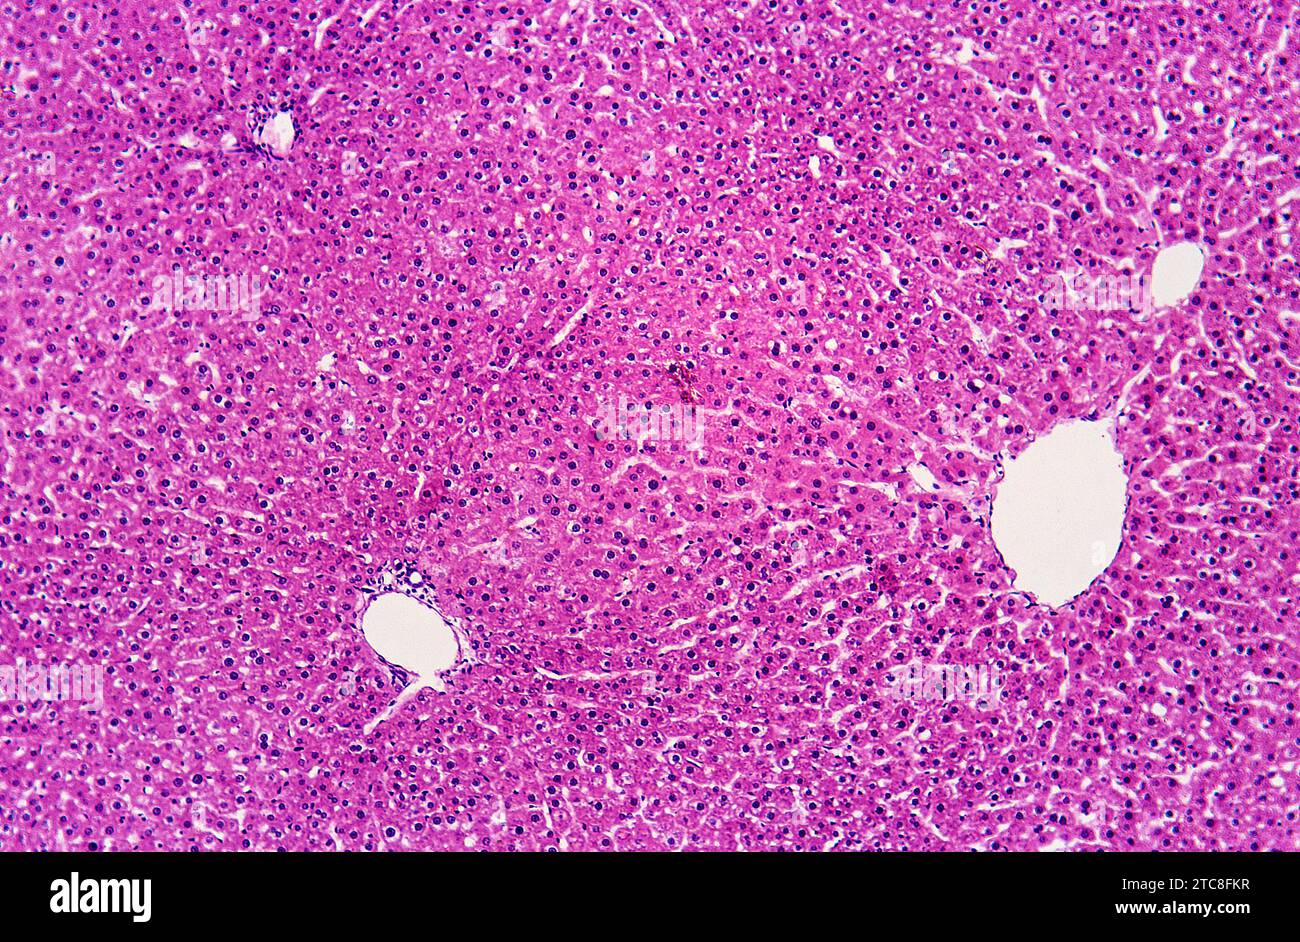 Human healthy liver with normal hepatocytes. Optical microscope. Magnification X100. Stock Photo